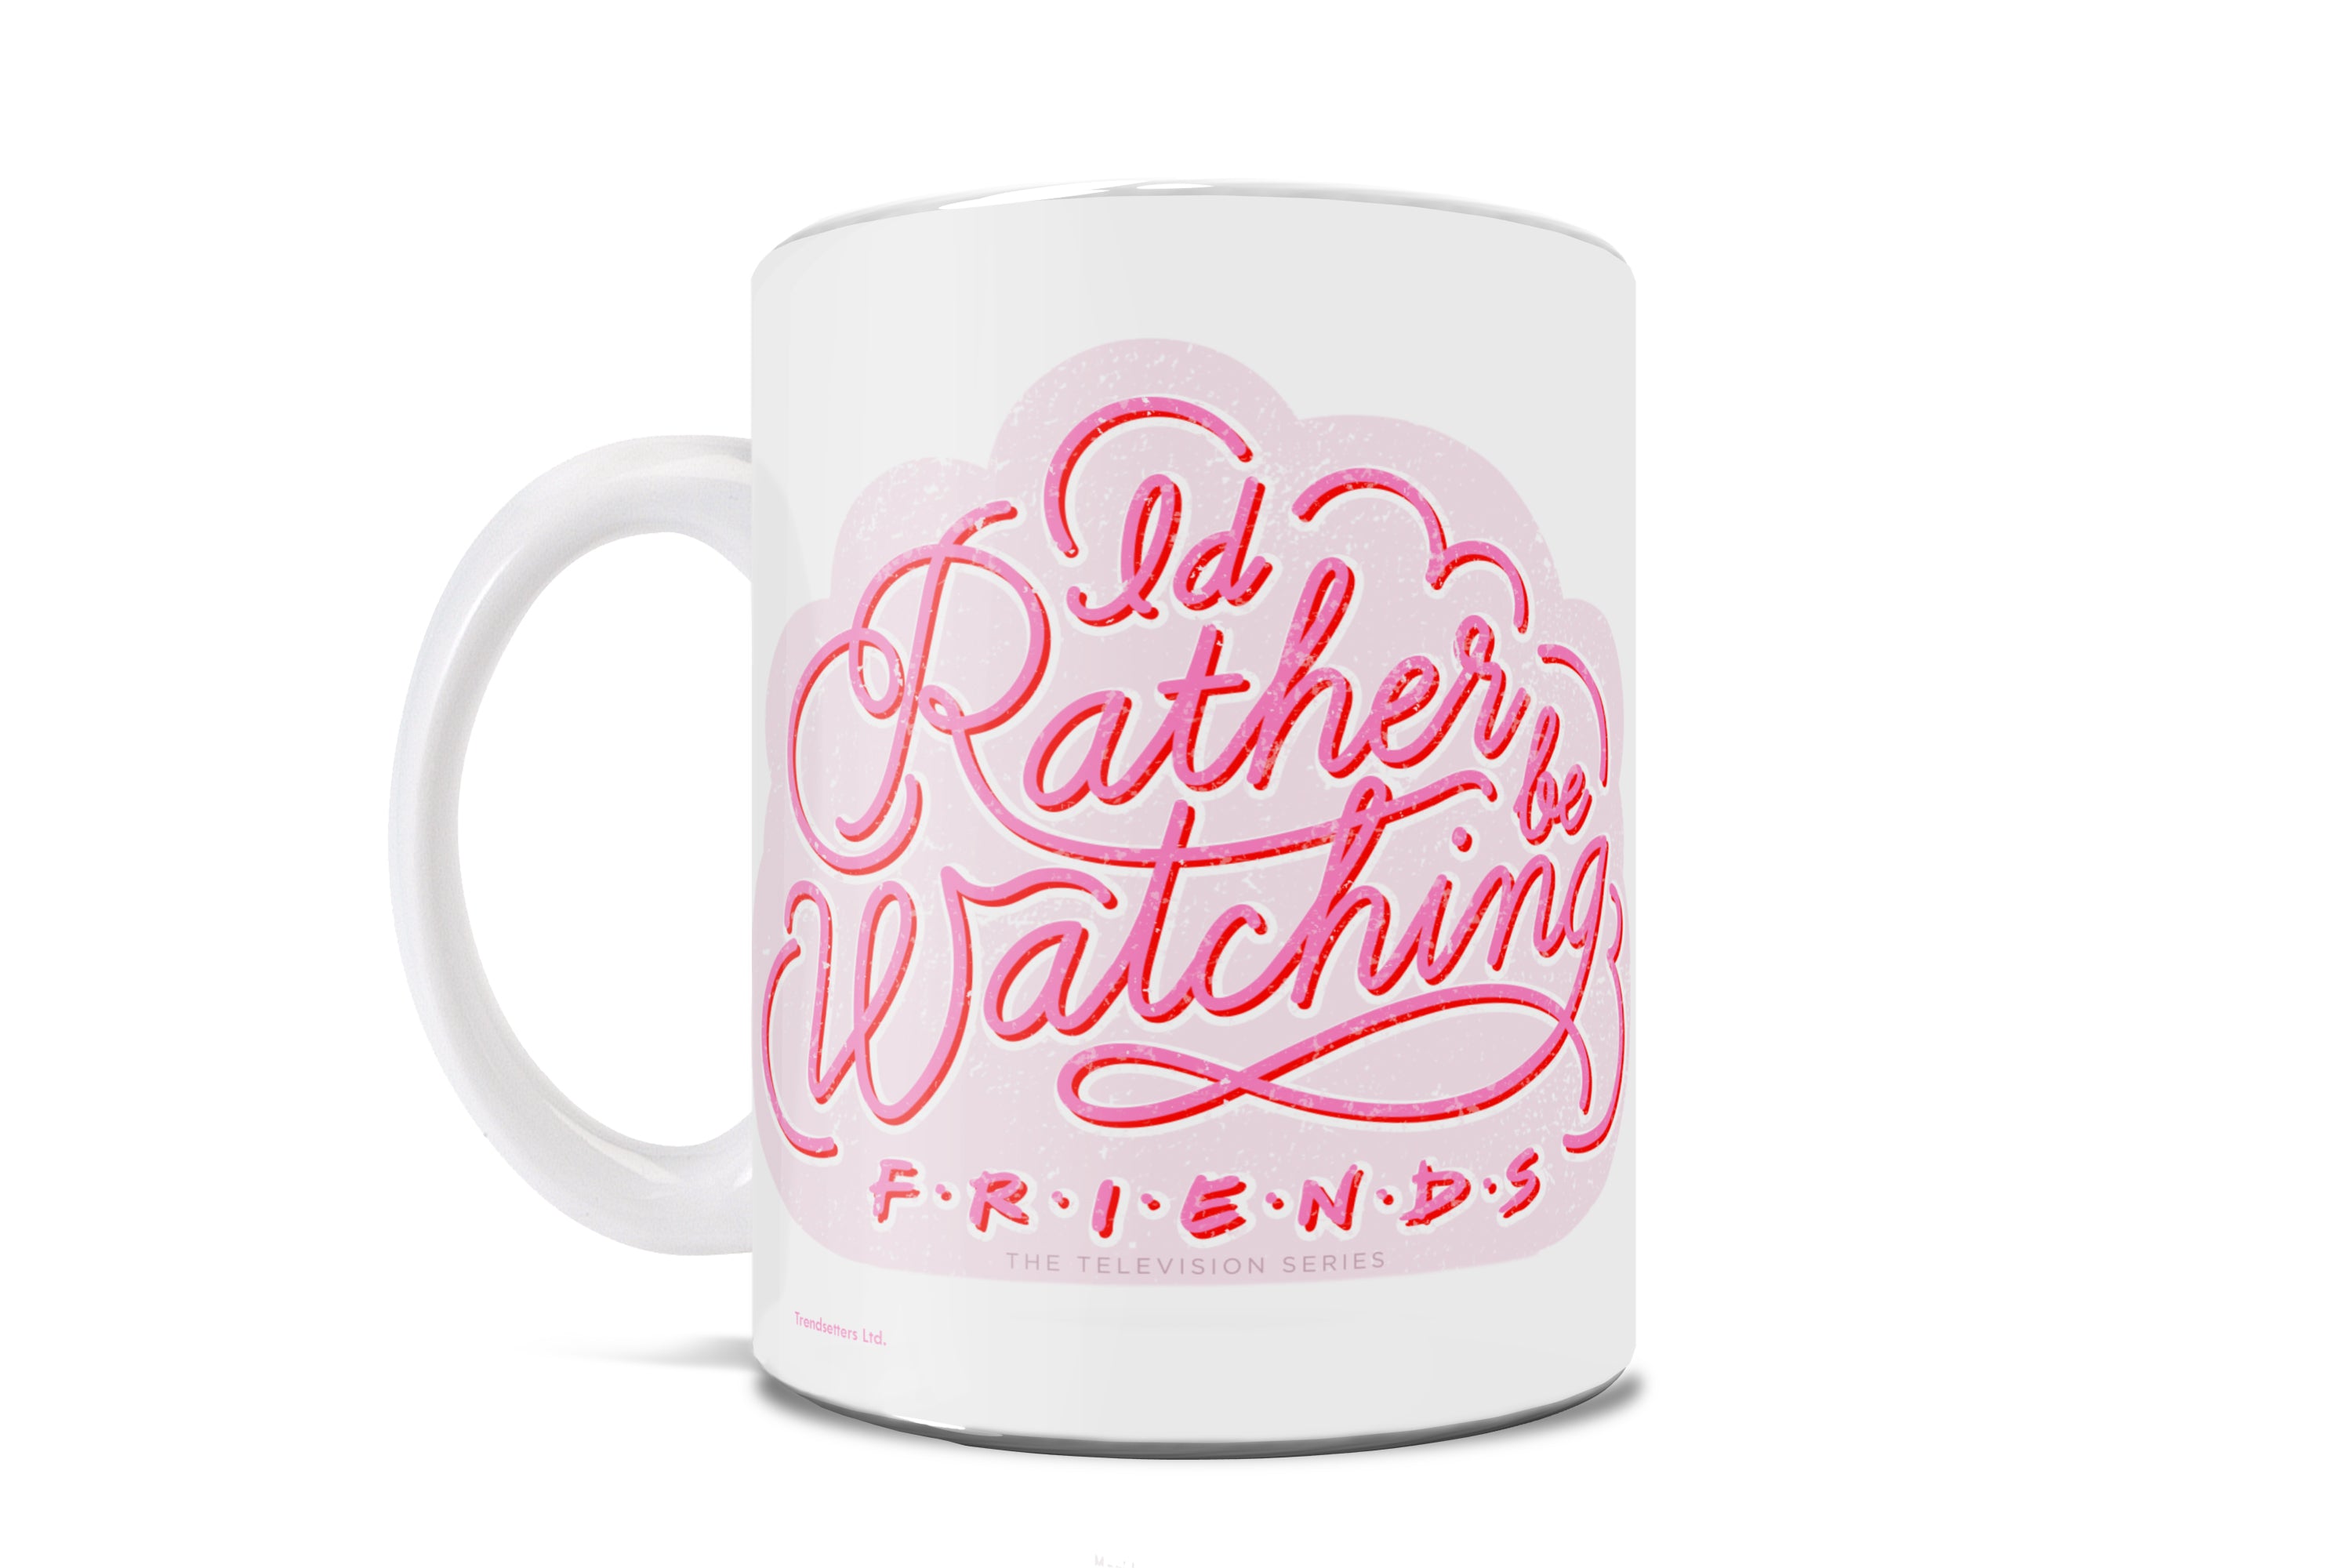 Friends: The Television Show (Id Rather be Watching Friends) 11 oz Ceramic Mug WMUG1006